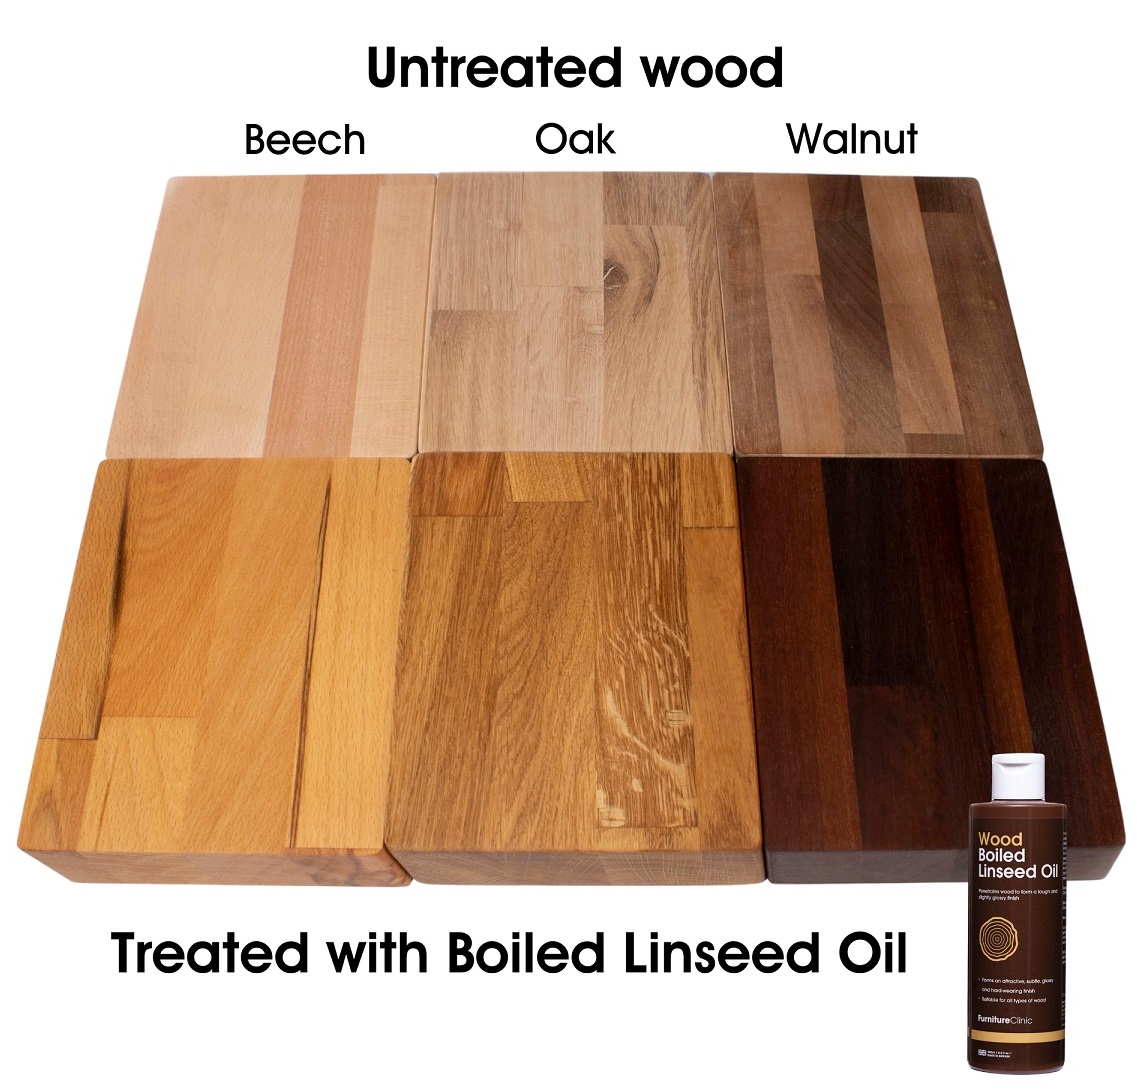 Boiled-Linseed-Oil-Finish-application on different types of wood shared-passionthursday.com